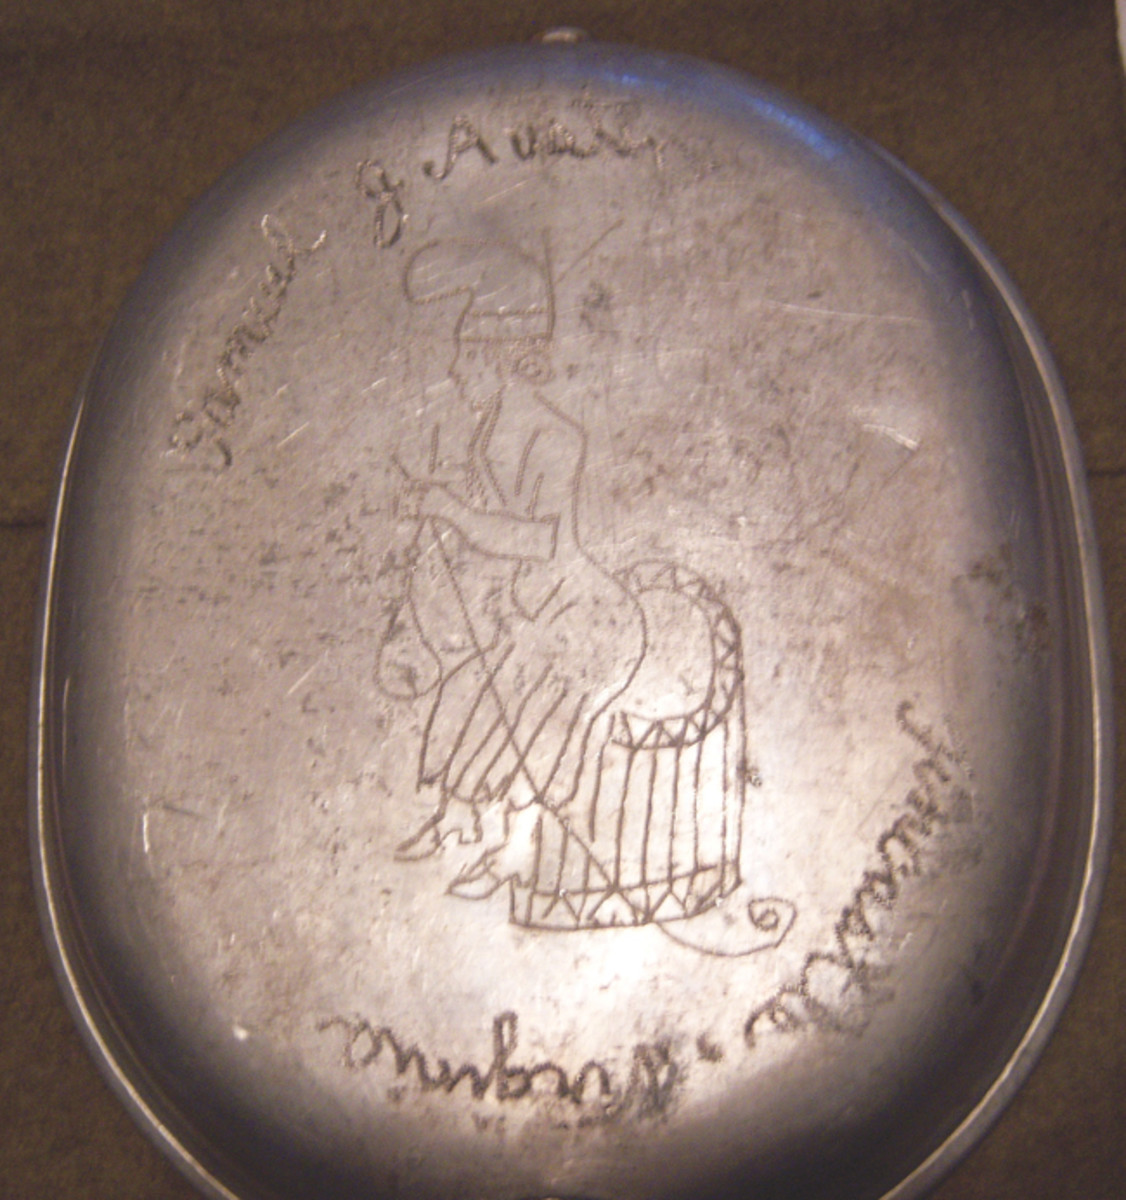  Less artistic than his fellow Virginian Sgt. Barney, Samuel J. Austin, from the very small town of Fincastle, Virginia, managed to carve a crude image of Betsy Ross sewing the first US flag on the pan portion of his mess kit.